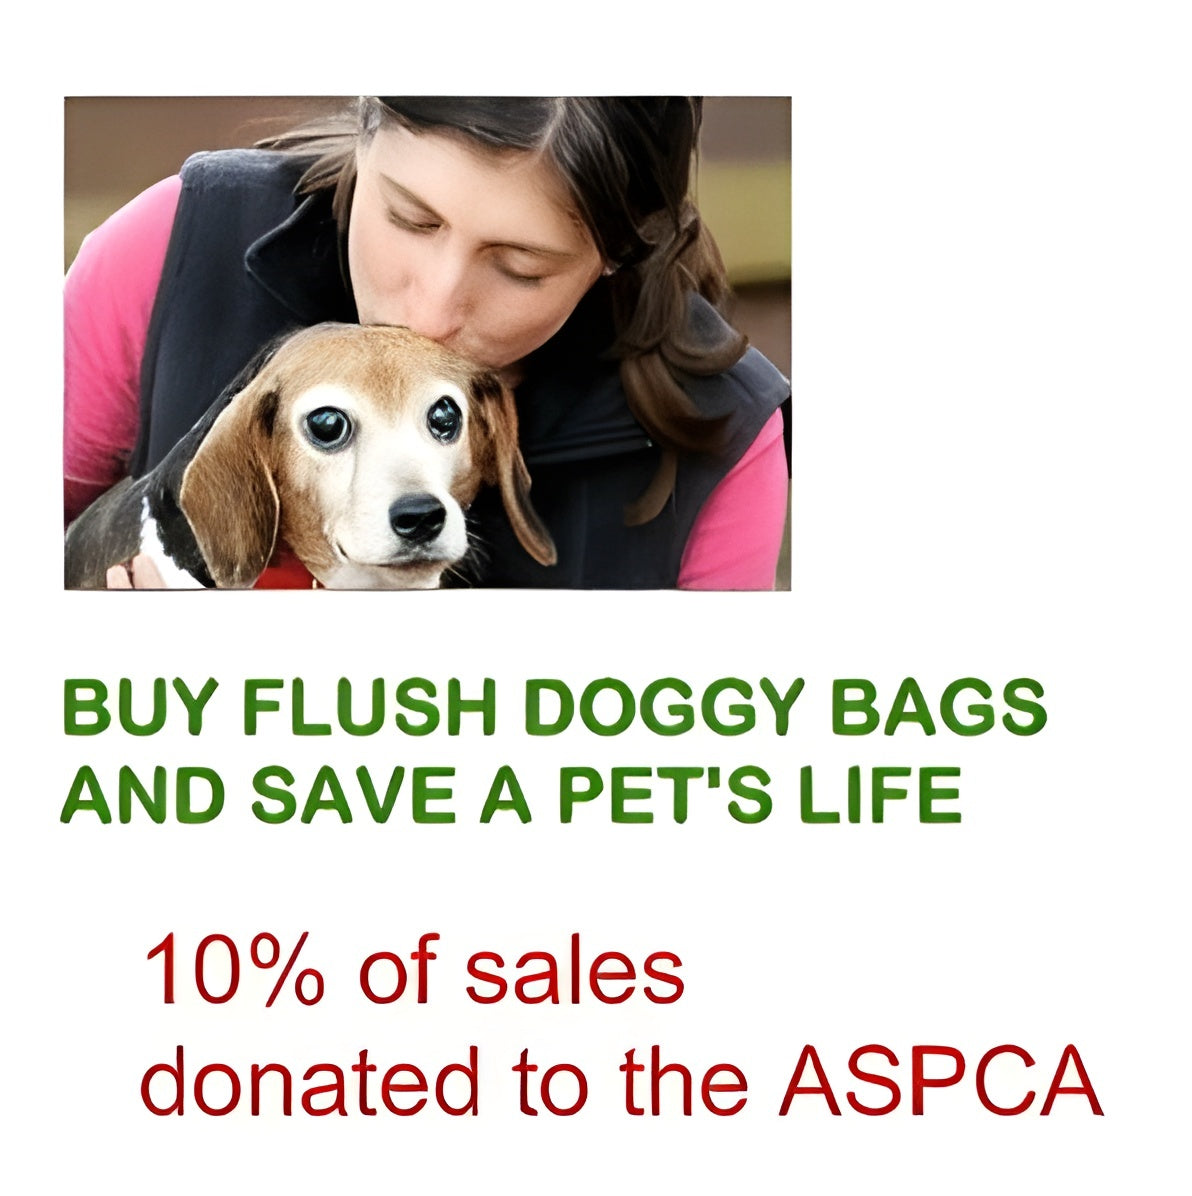 buy Flush Doggy bags and save a pet's life. 10% of sales donated to fight puppy mills.